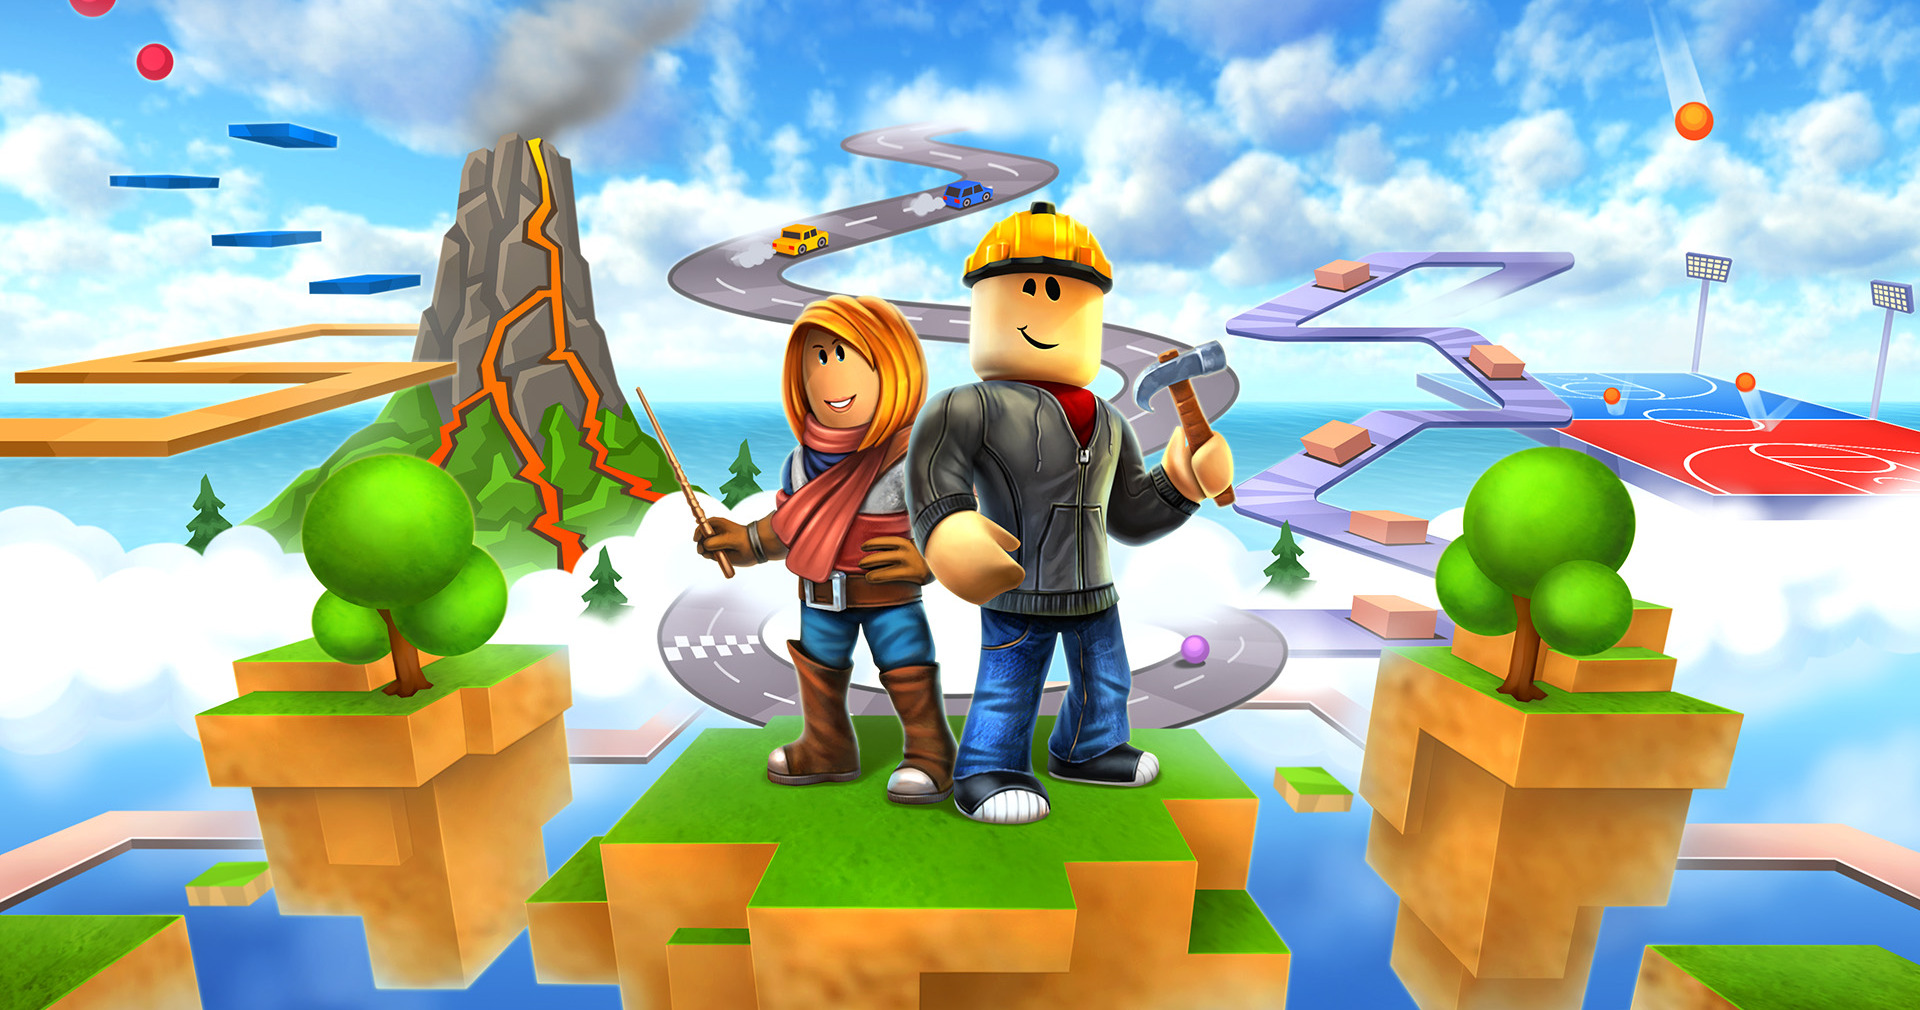 Roblox Intro To Game Building Flex Small Online Class For Ages 8 13 Outschool - 